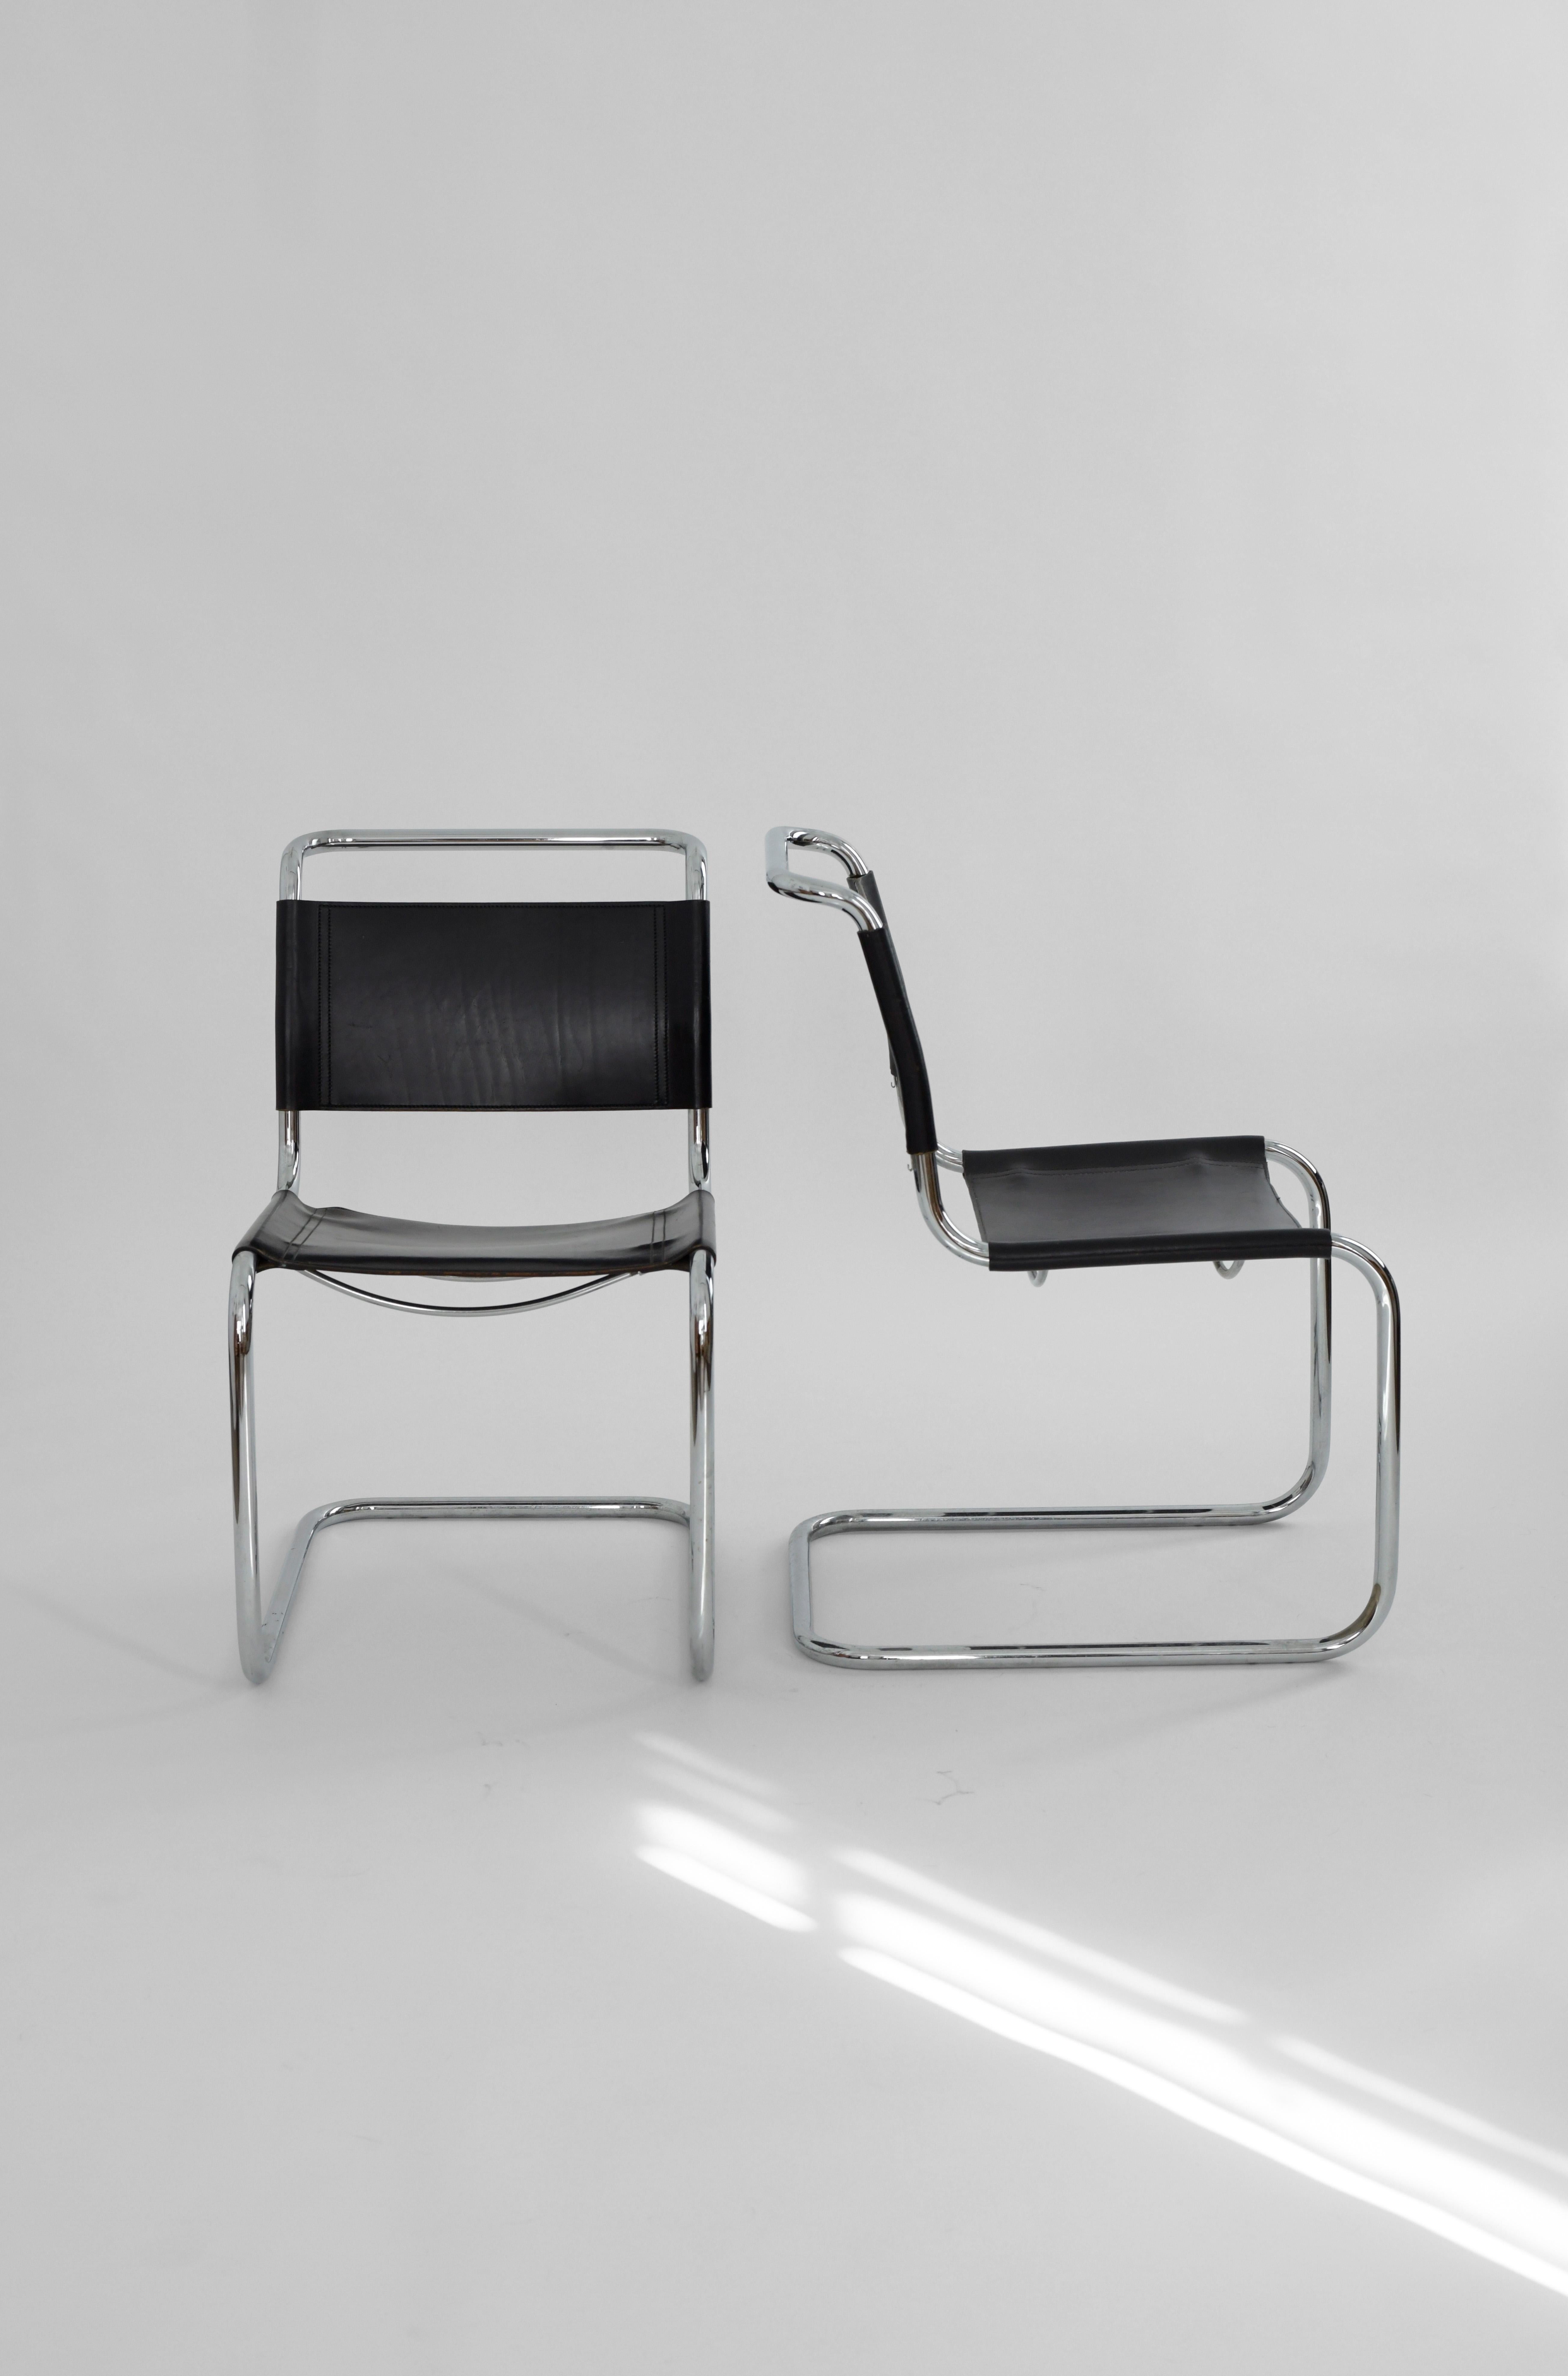 Pair of 1980s Marcel Breuer B33 chairs for Fasem. This iconic cantilevered design from the bauhaus is as comfortable as it is beautiful and still looks modern a century after their creation. 

This pair has a really nice age appropriate patina on